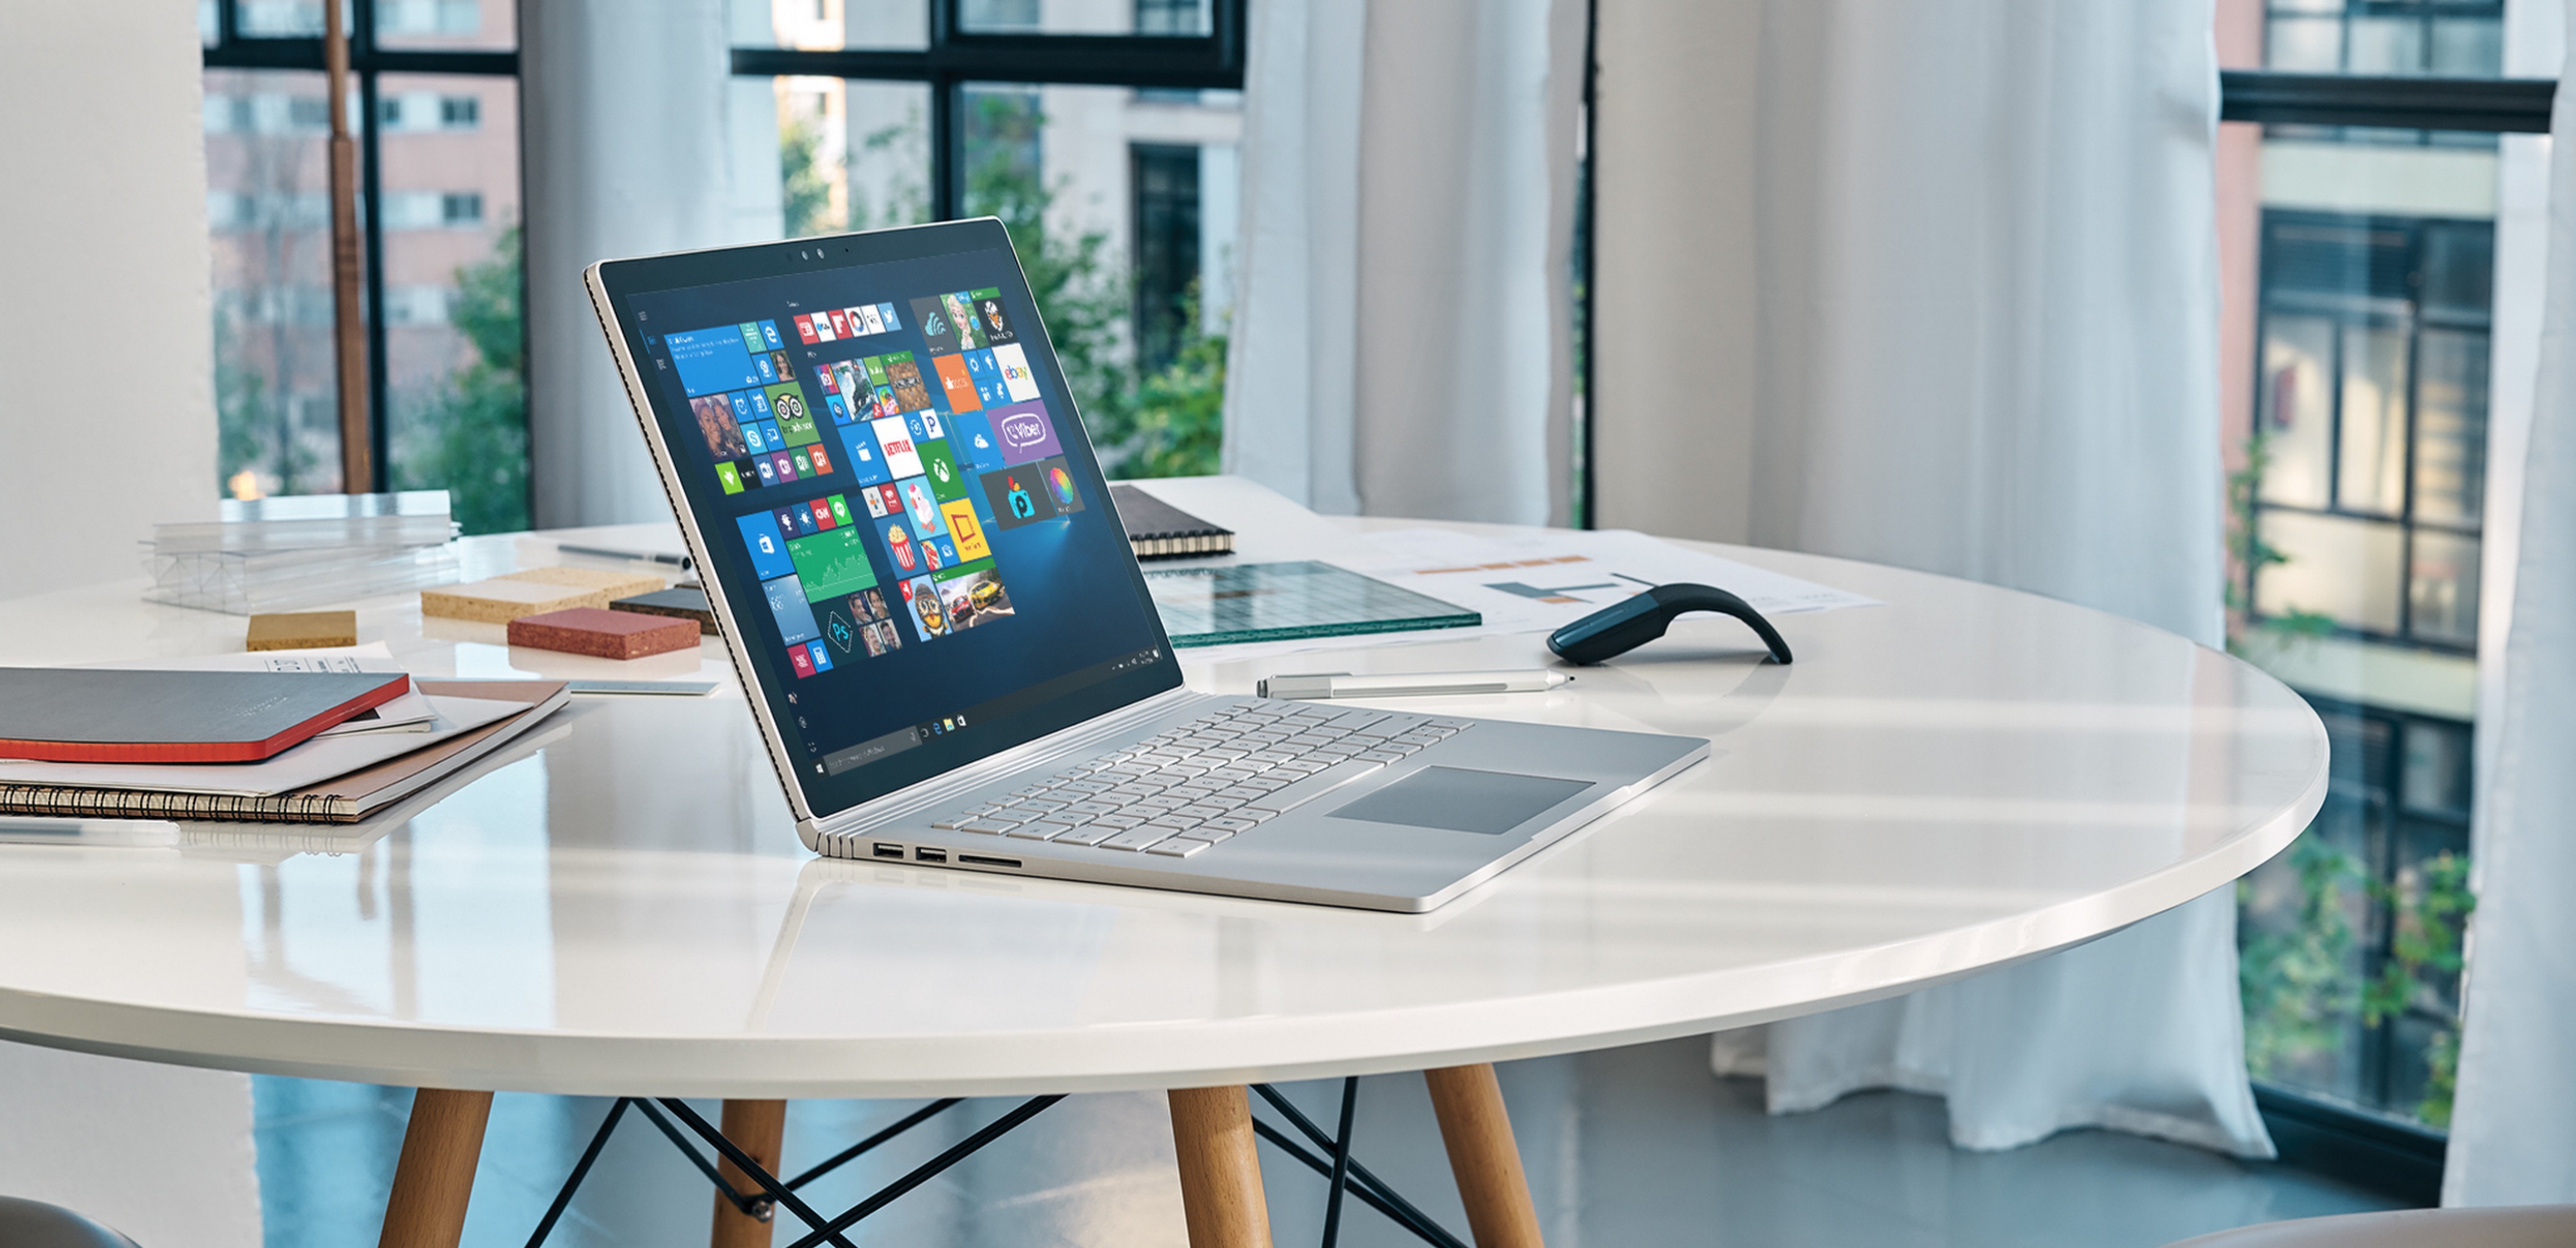 Forrester Study Finds Windows 10 Can Reduce Security, IT and Productivity Costs